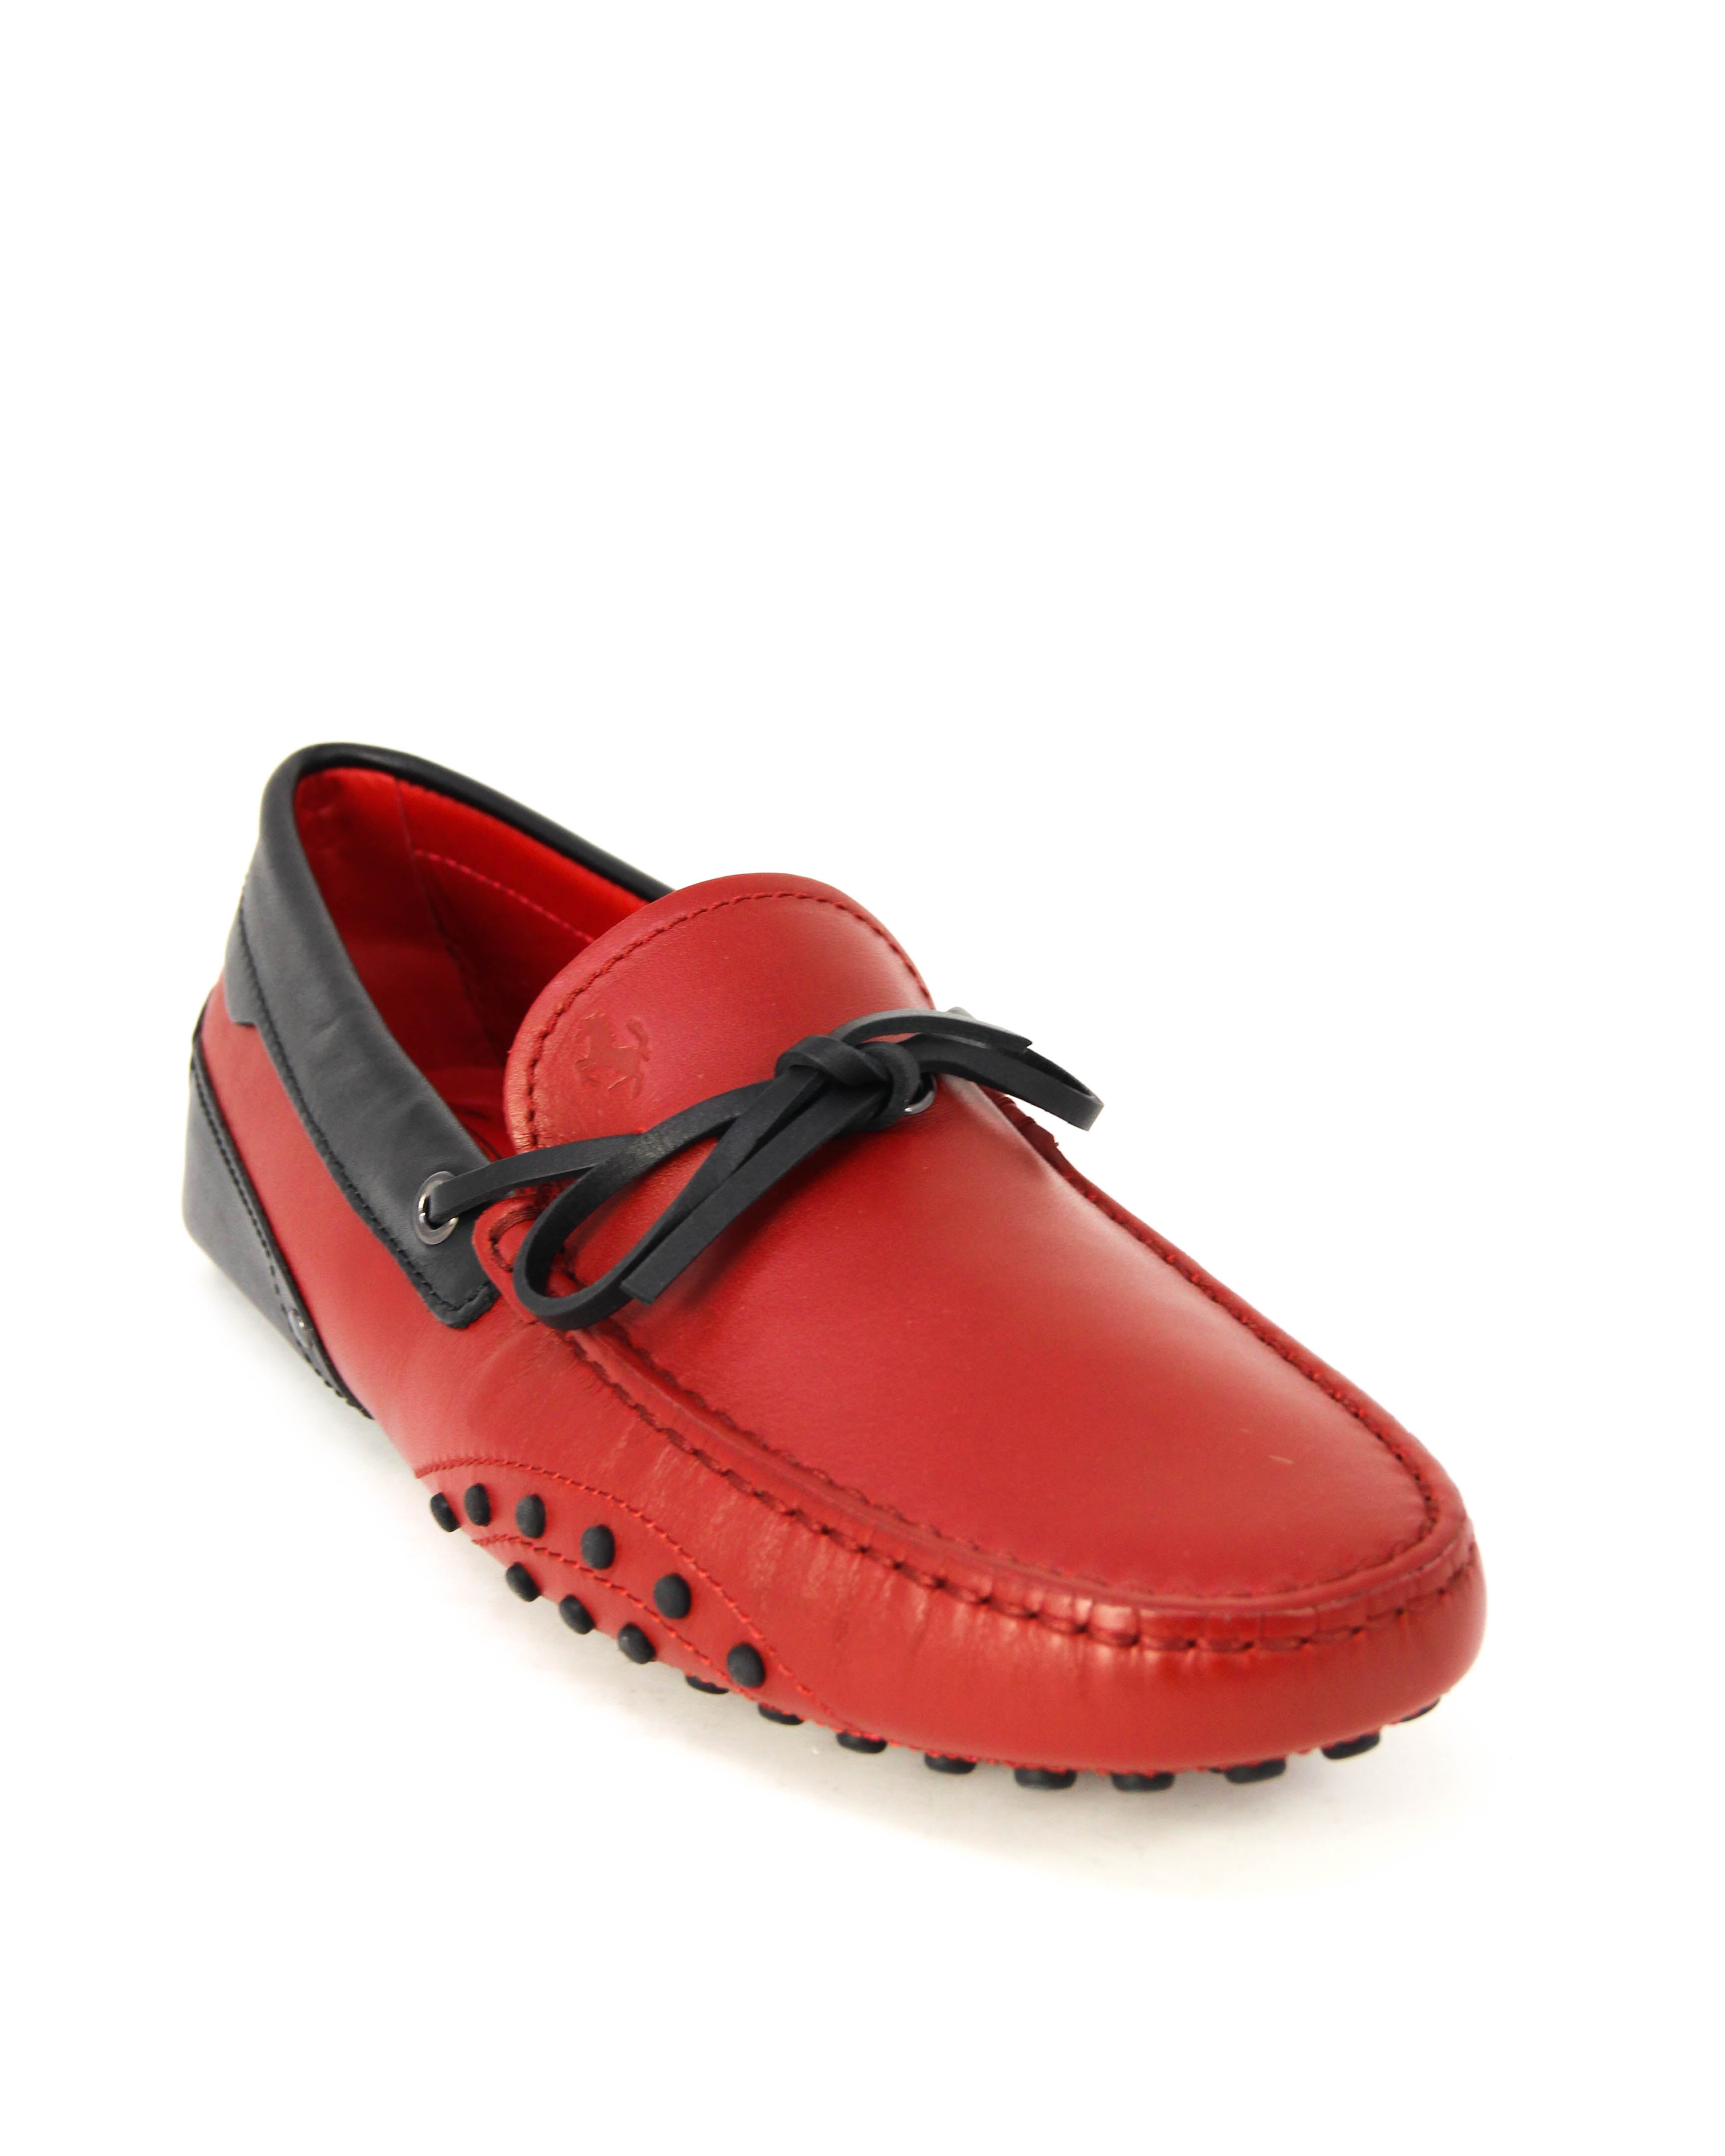 tods uk shoes